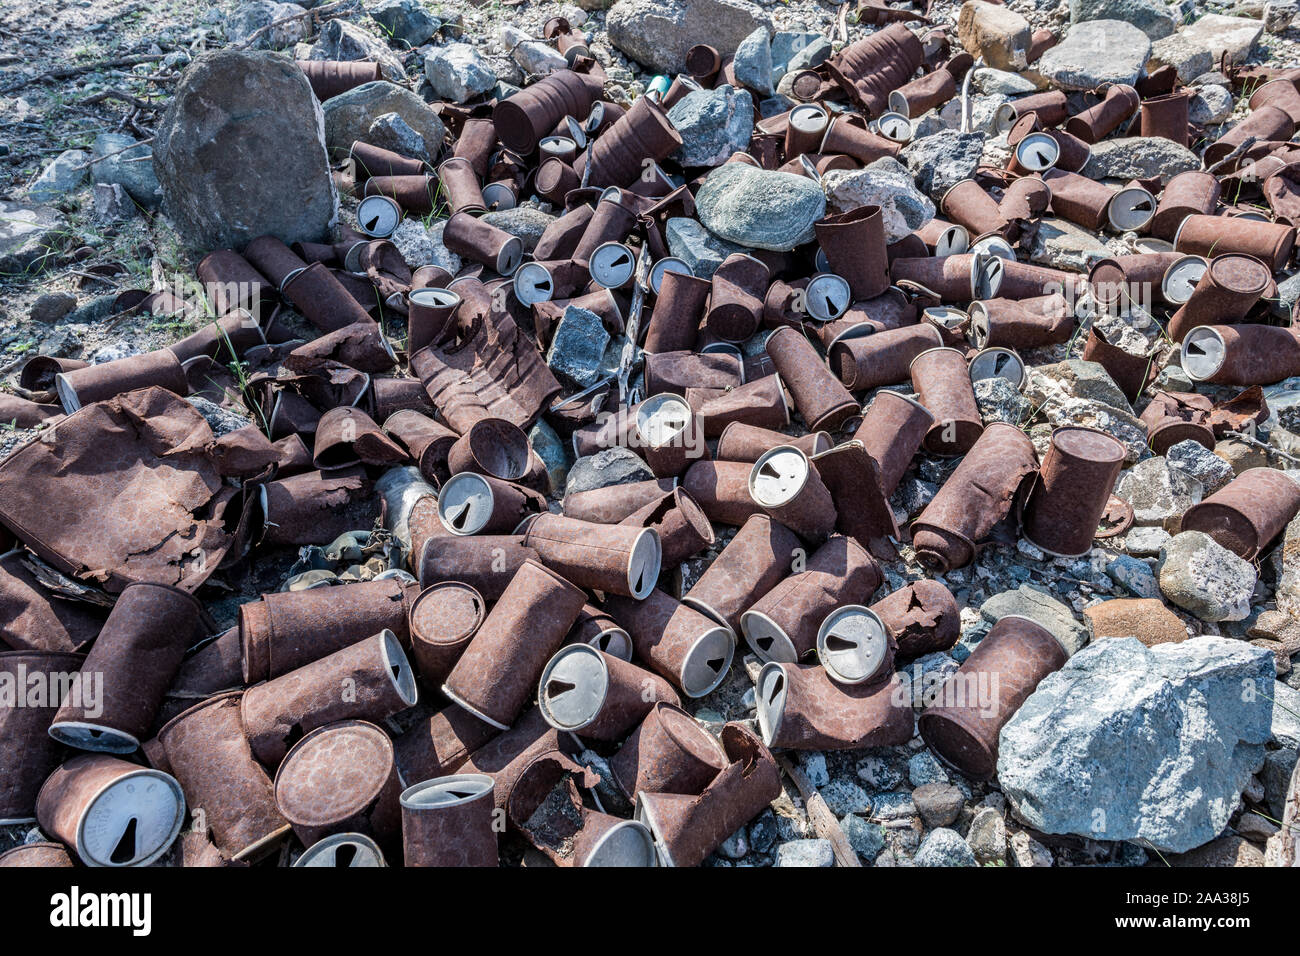 Rusted cans disposed on the ground, environmental issue Stock Photo